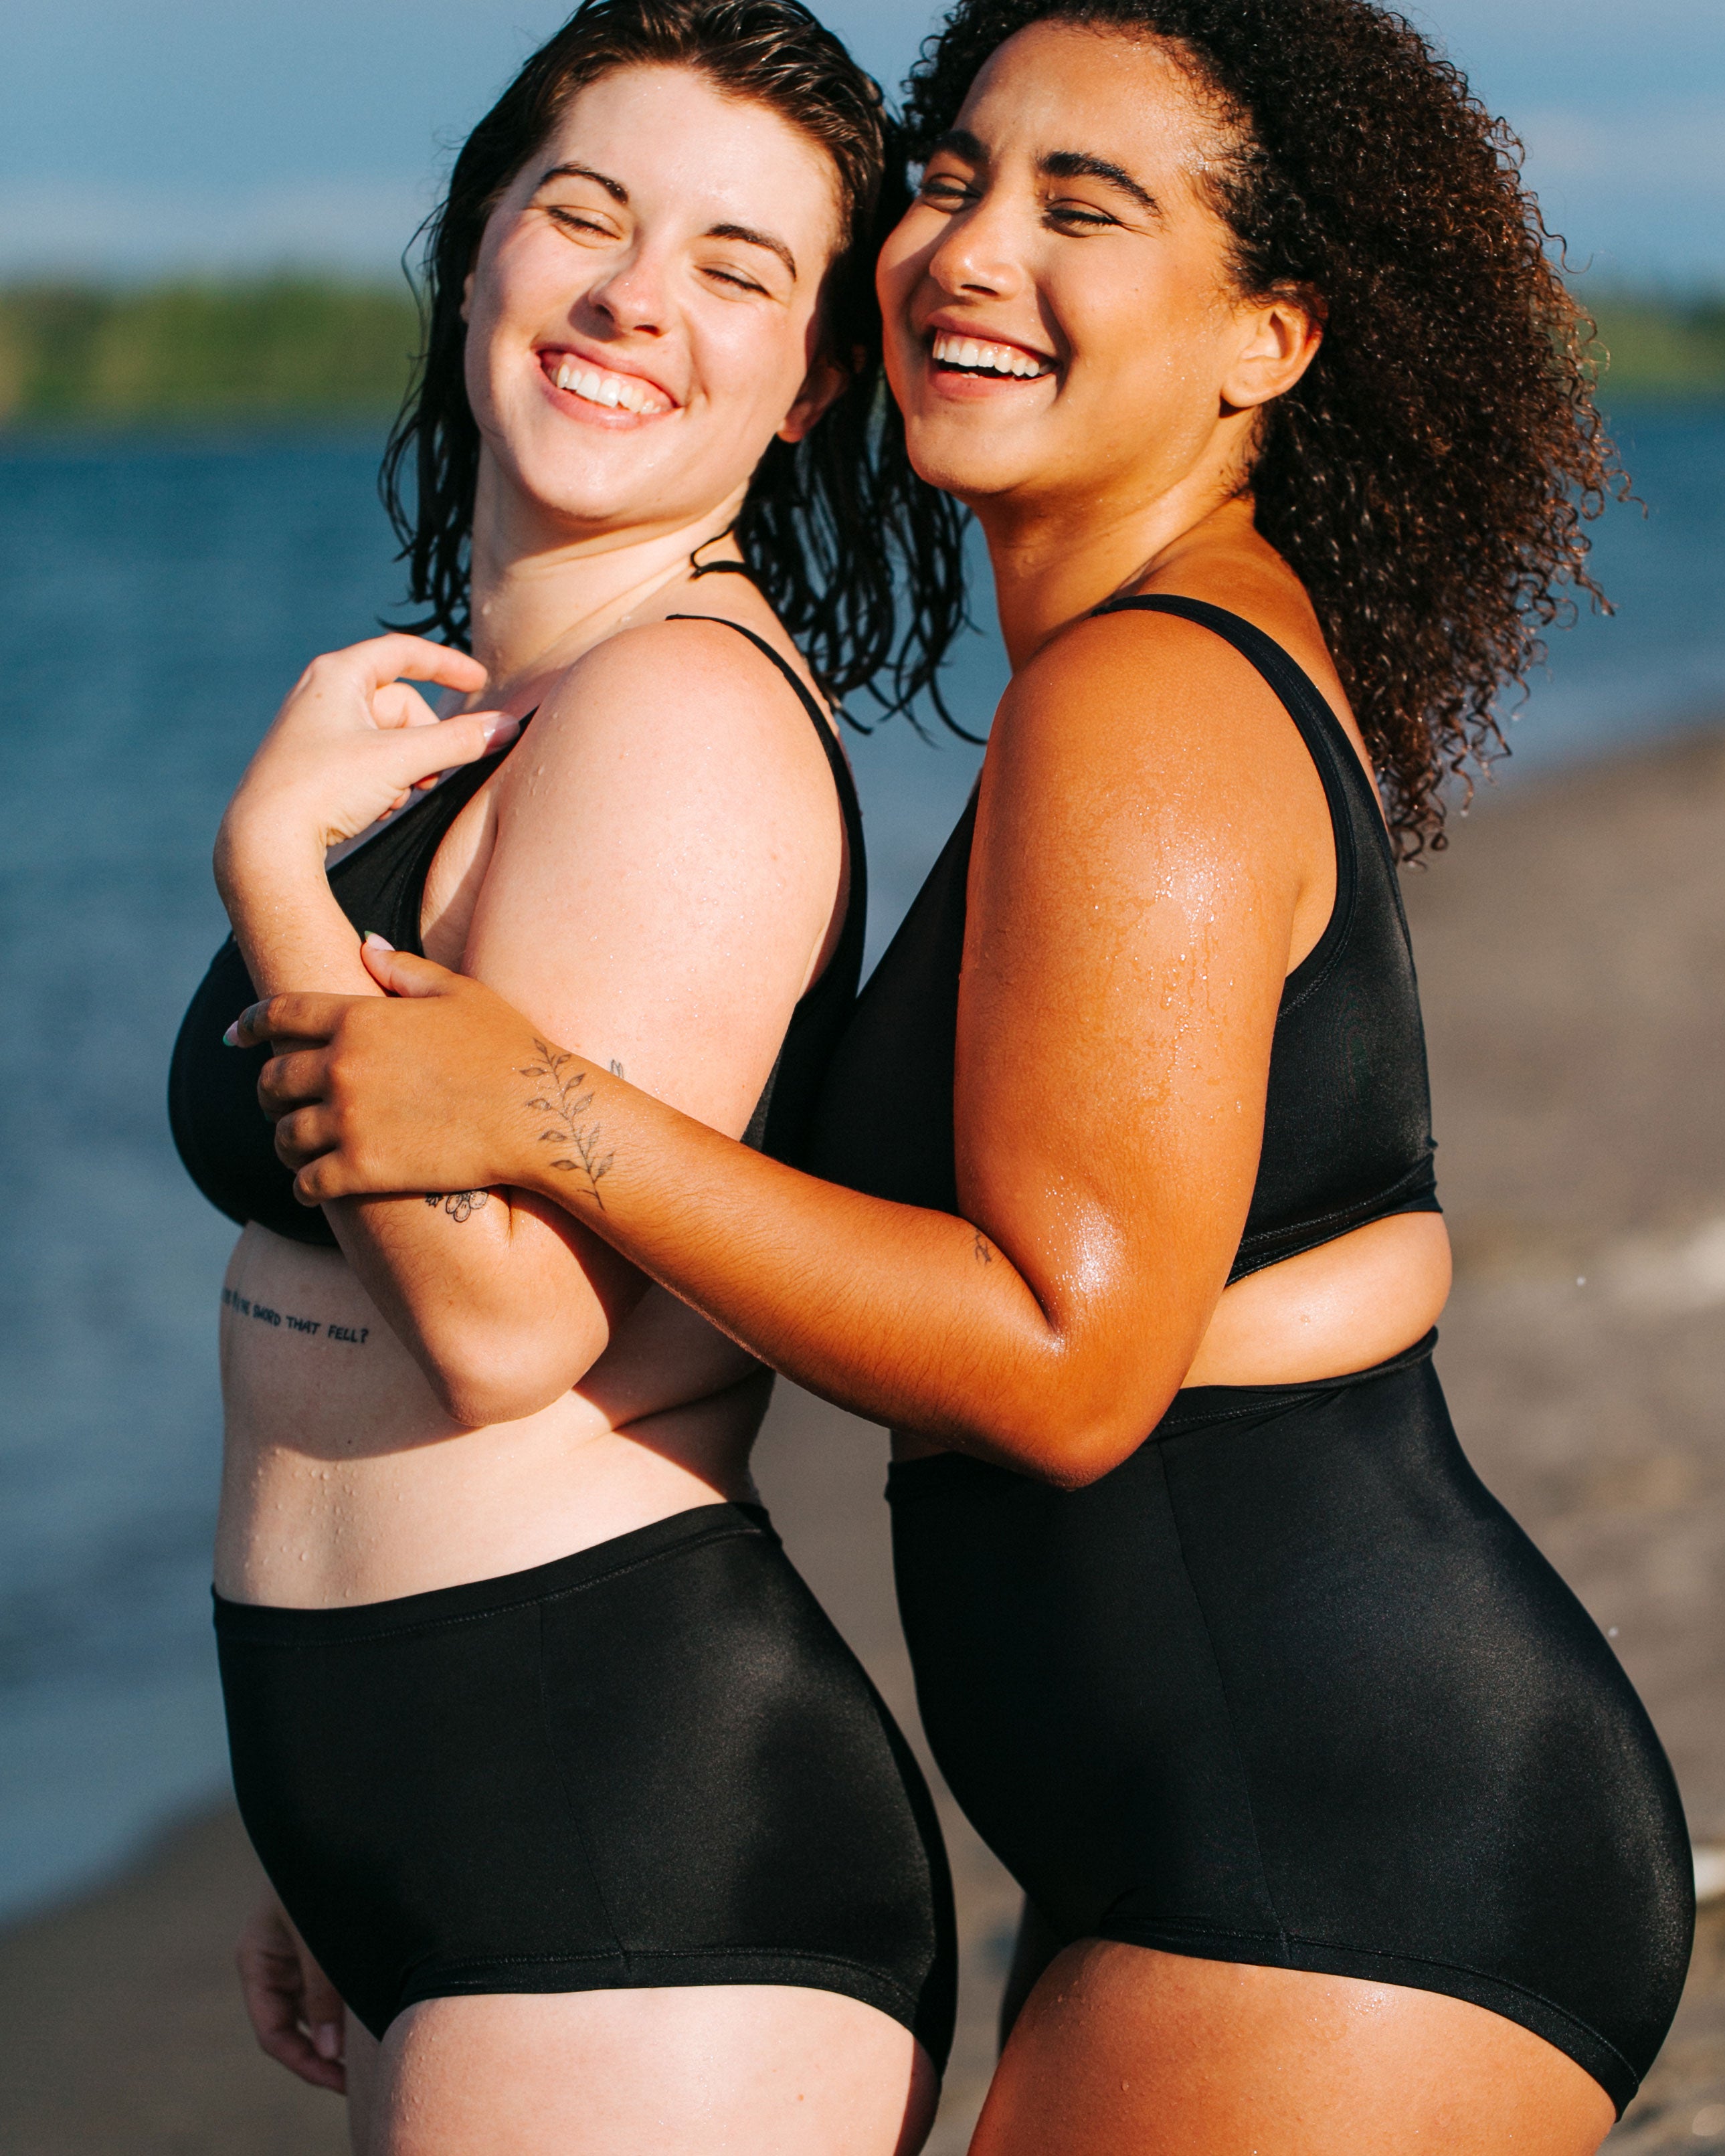 Two models from the side laughing together on the beach wearing Thunderpants recycled nylon Swimwear Original style Bottoms and Sky Rise style , and Swimwear Top in Plain Black.